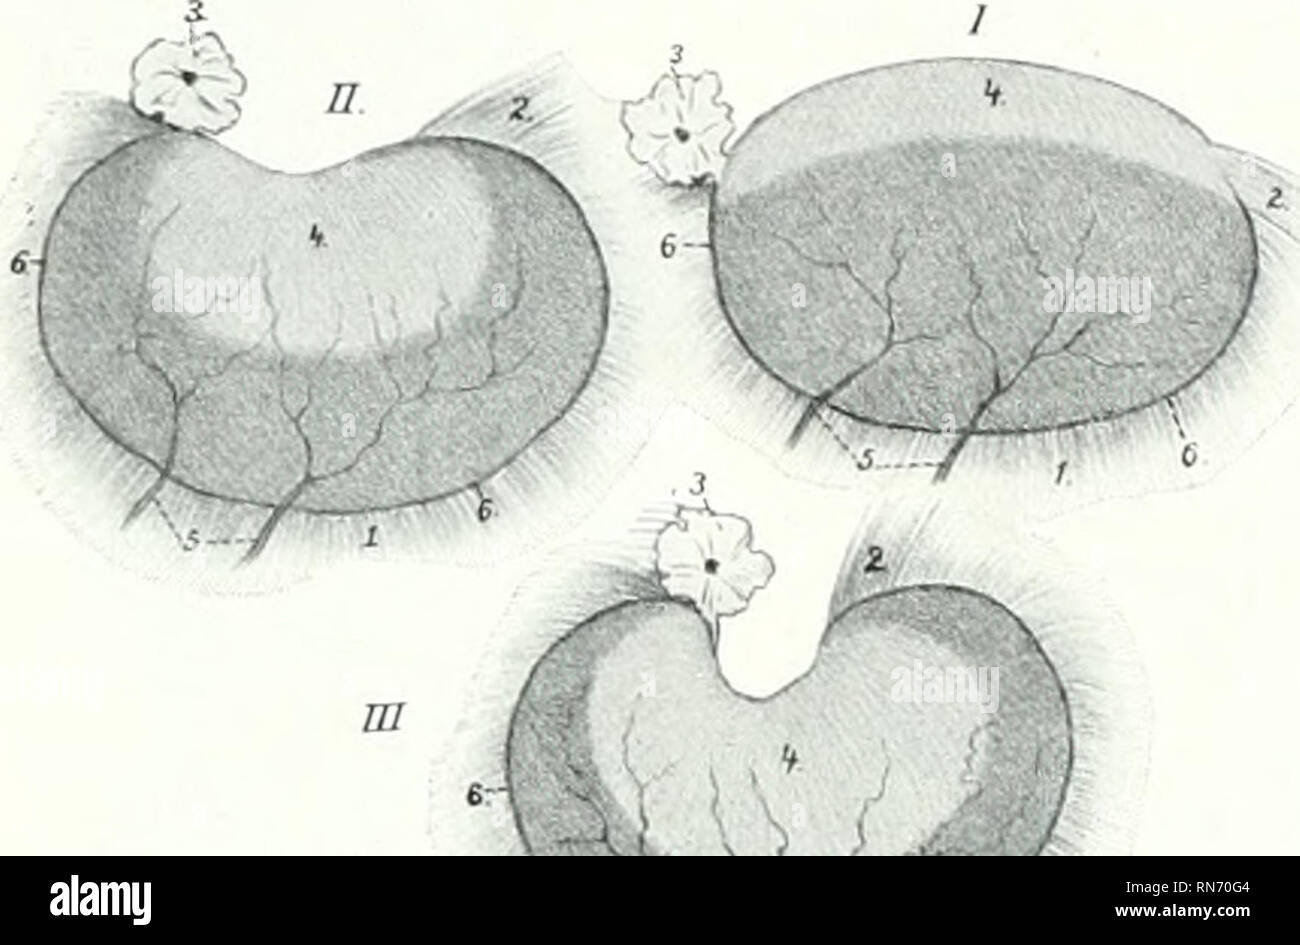 . The anatomy of the domestic animals. Veterinary anatomy. 598 GENITAL ORGANS OF THE MARE The stroma of the ovary (Stroma ovarii) is a network of connccti-e tissic. In the meshes of the stroma there are (in young subjects) numerous ovisacs or folliculi oophori, containing ova (Ovula) in various stages of development. The inunature ovum is surroundeil by follicle cells; those more advanceil in development are enclosed by several (0-8) layers of follicle cells, forming the stratum granulosum, and by a condensation of the stroma termed the theca folliculi; within the thcca is a quantity of flui Stock Photo